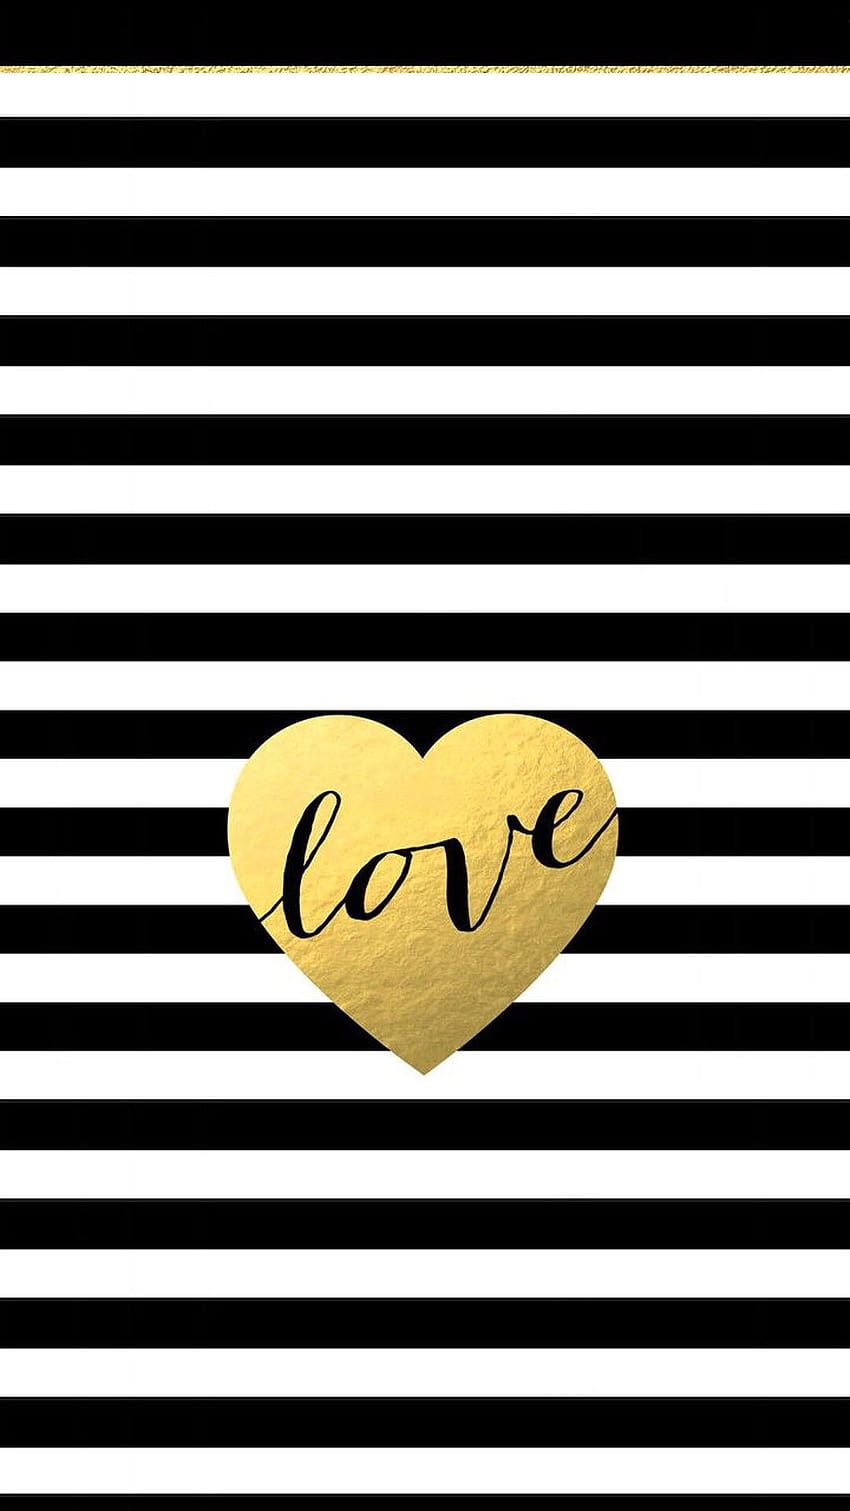 Black White Stripes Gold Heart Love Iphone Phone Backgrounds, iphone black and white love HD phone wallpaper